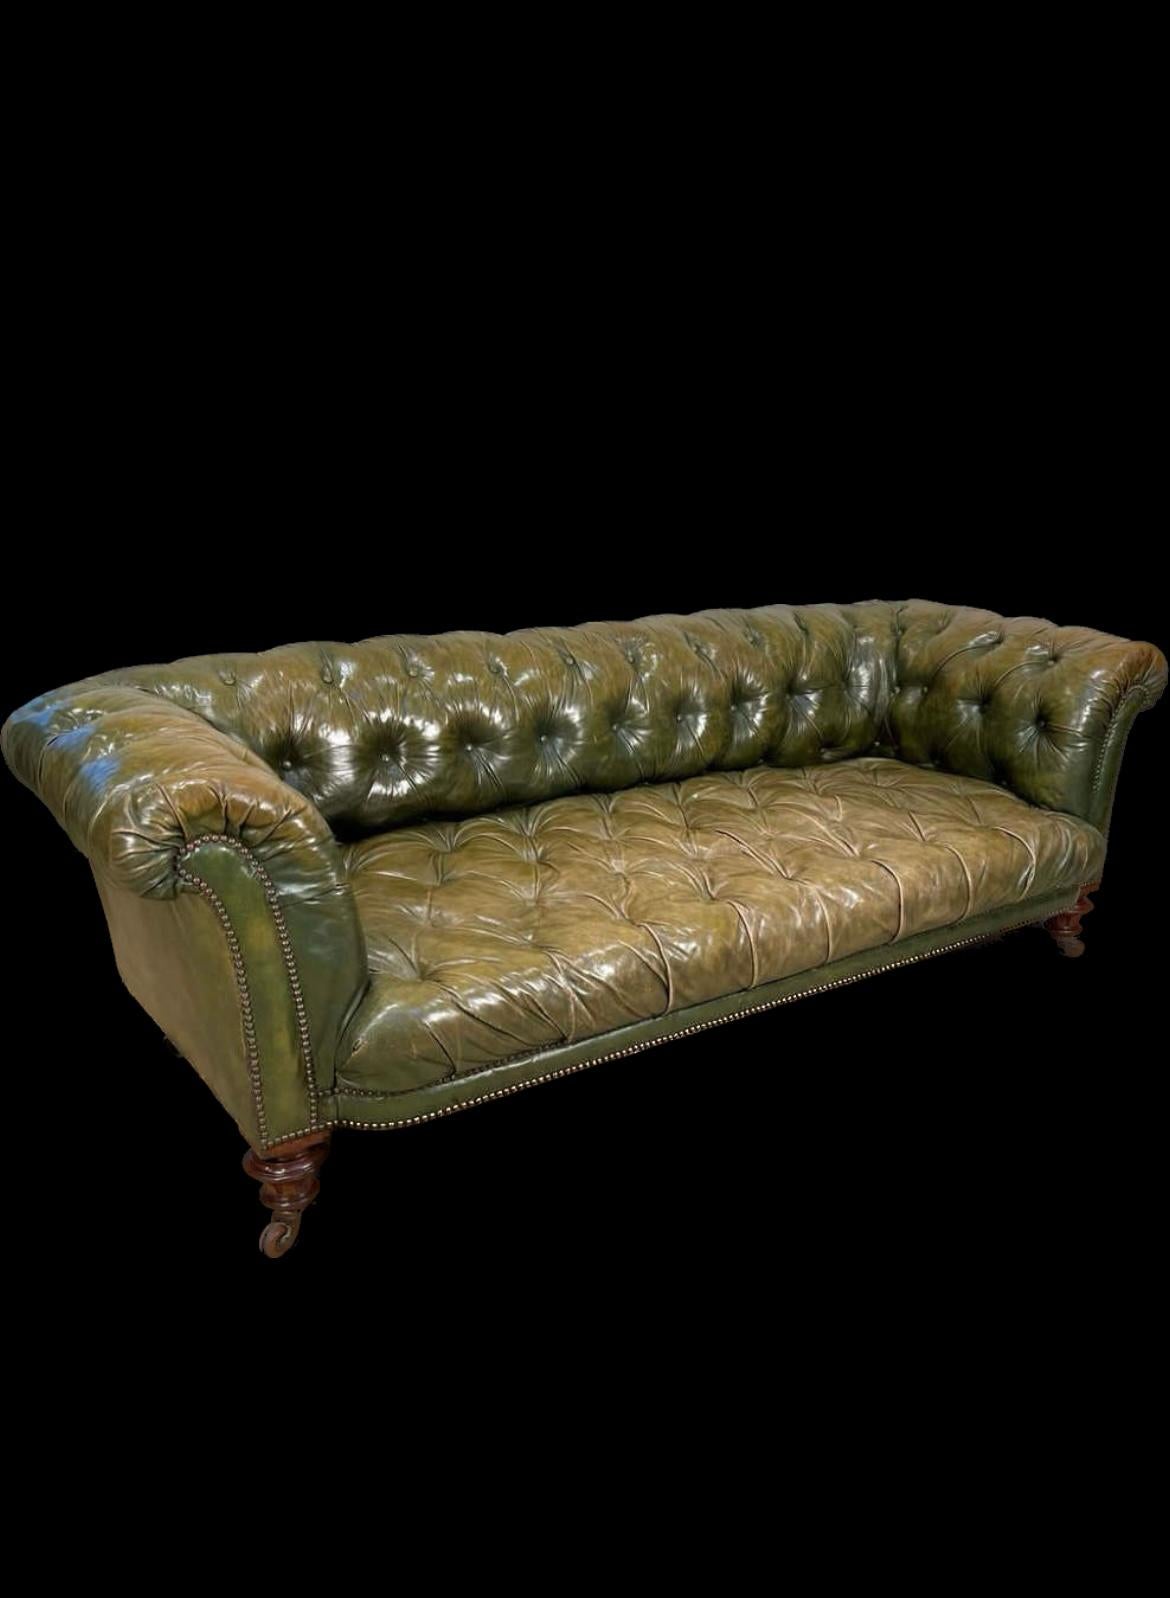 Early 19thC William IV Chesterfield Sofa in Beautiful Green Leathers In Good Condition For Sale In London, GB